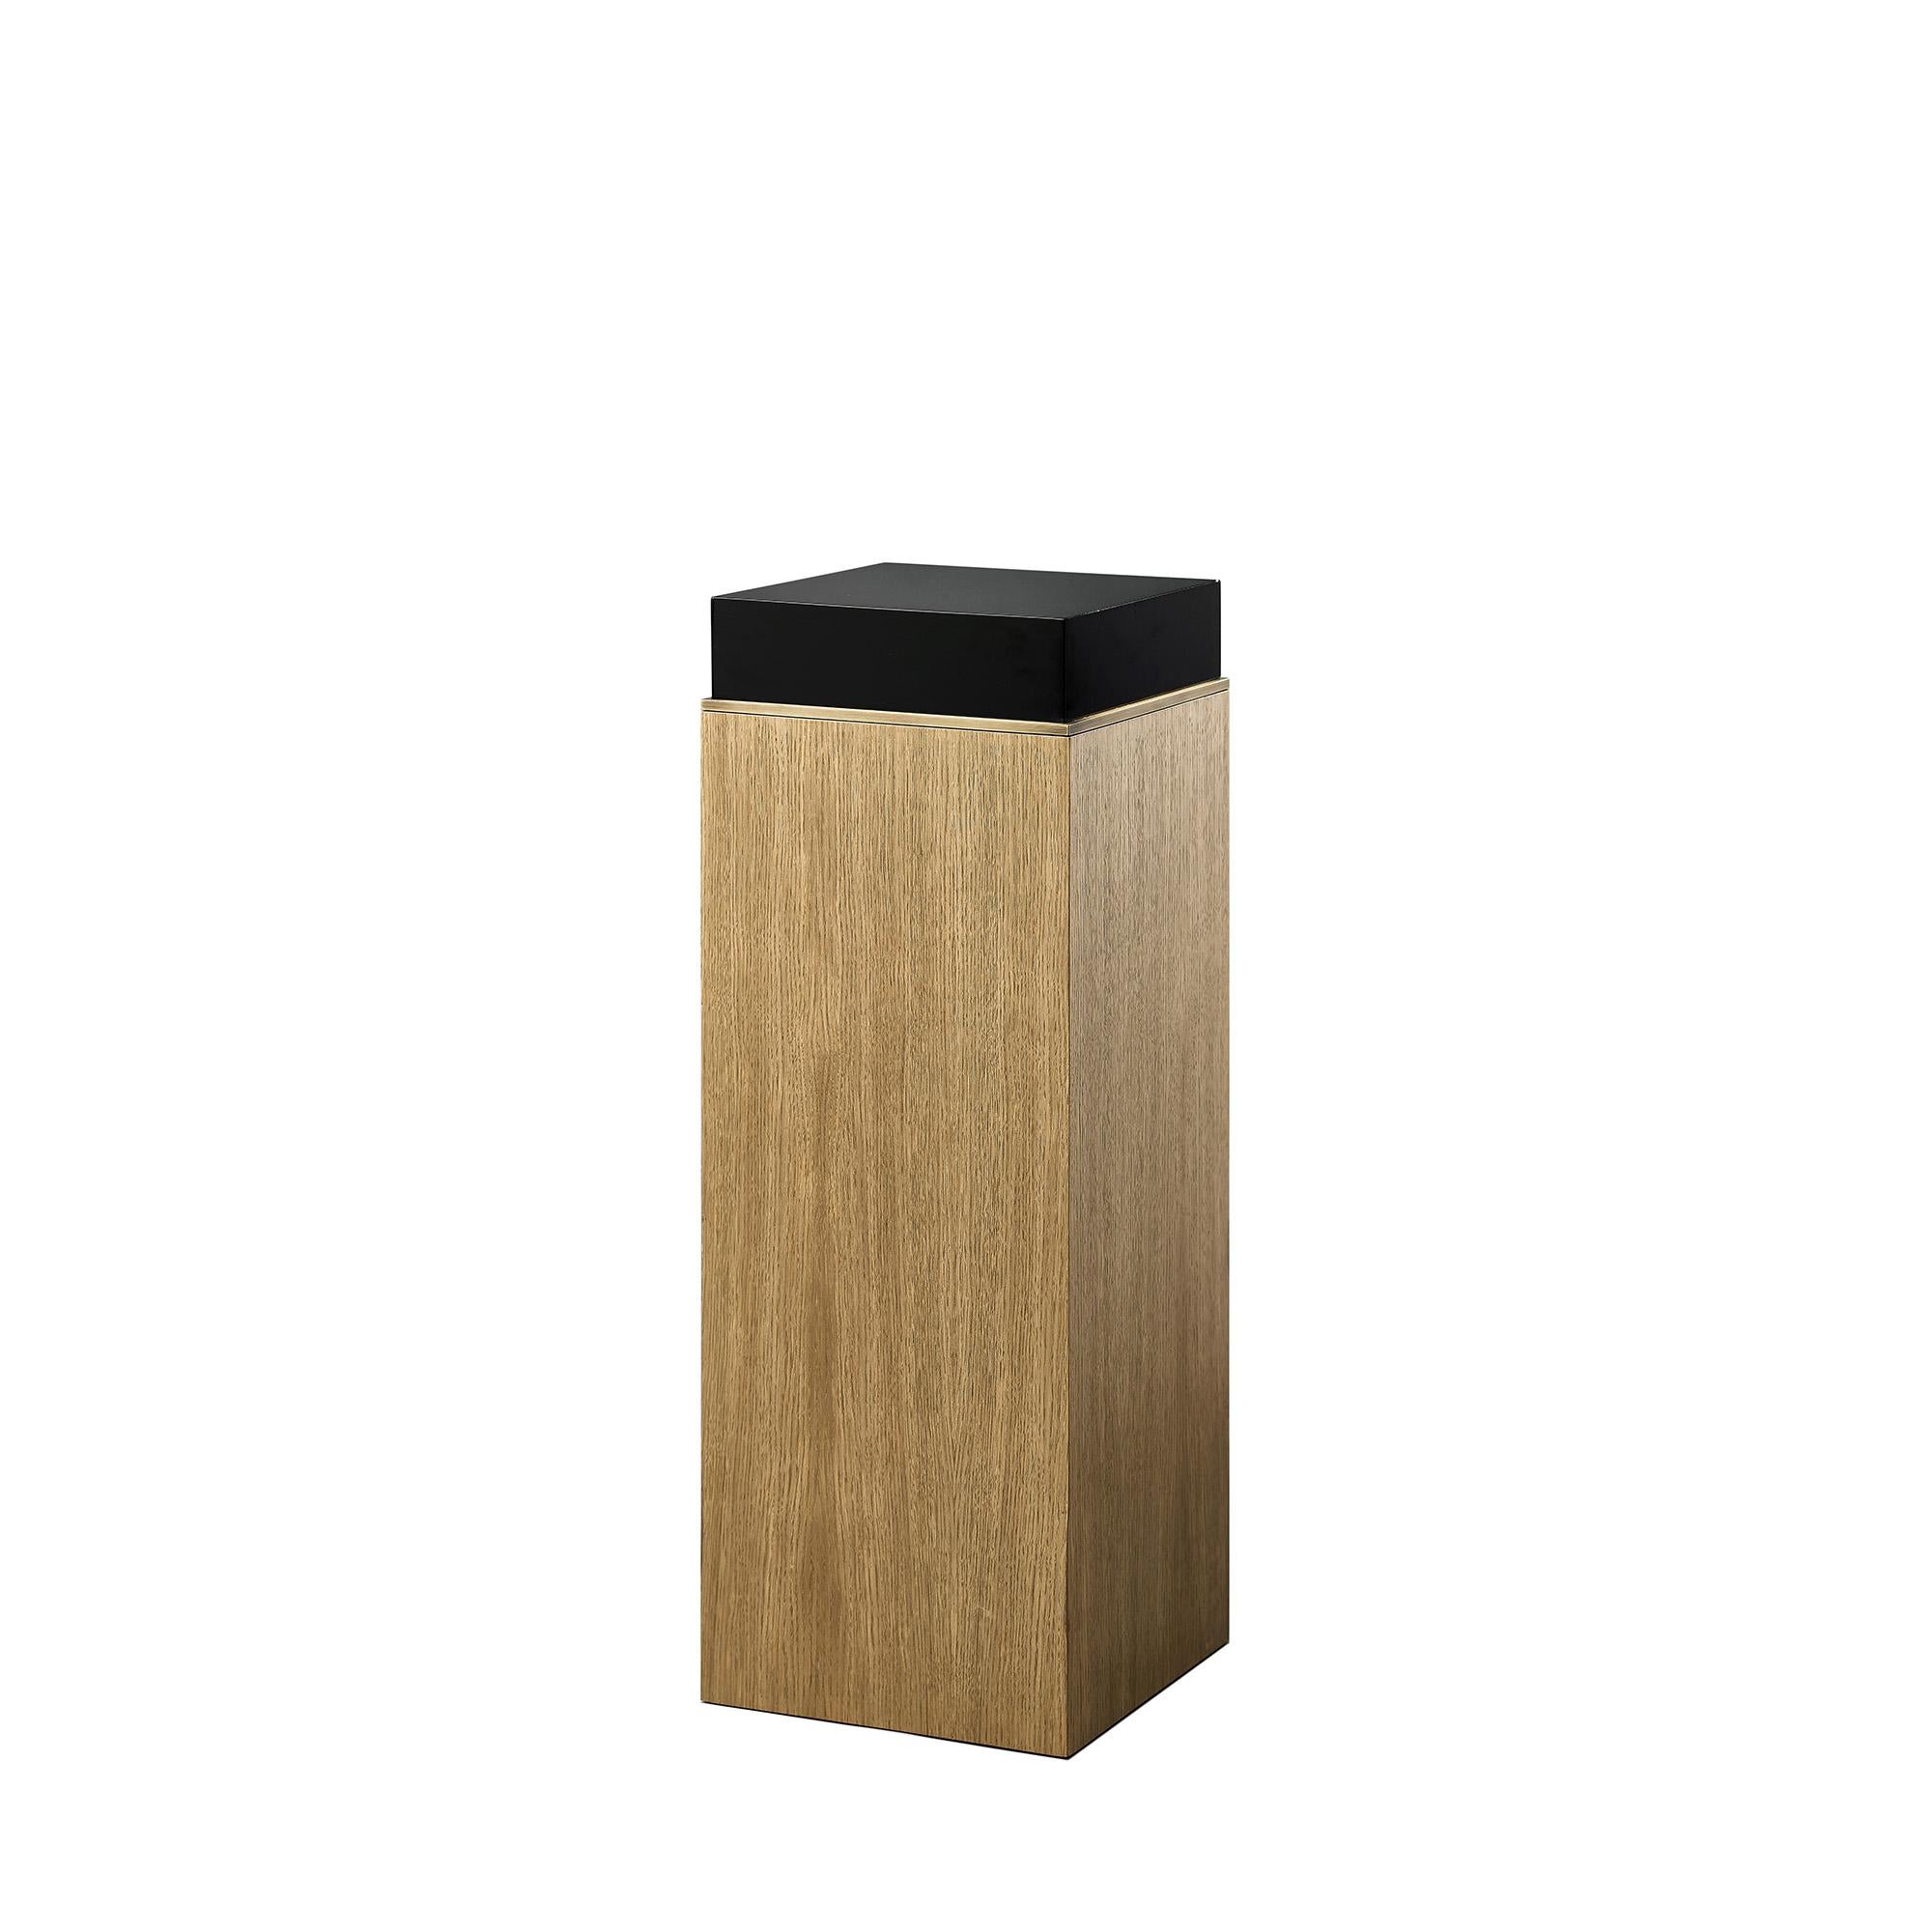 Mid-Century Modern Block Pedestal, Limed Oak and Brass Details, Handcrafted in Portugal by Duistt For Sale